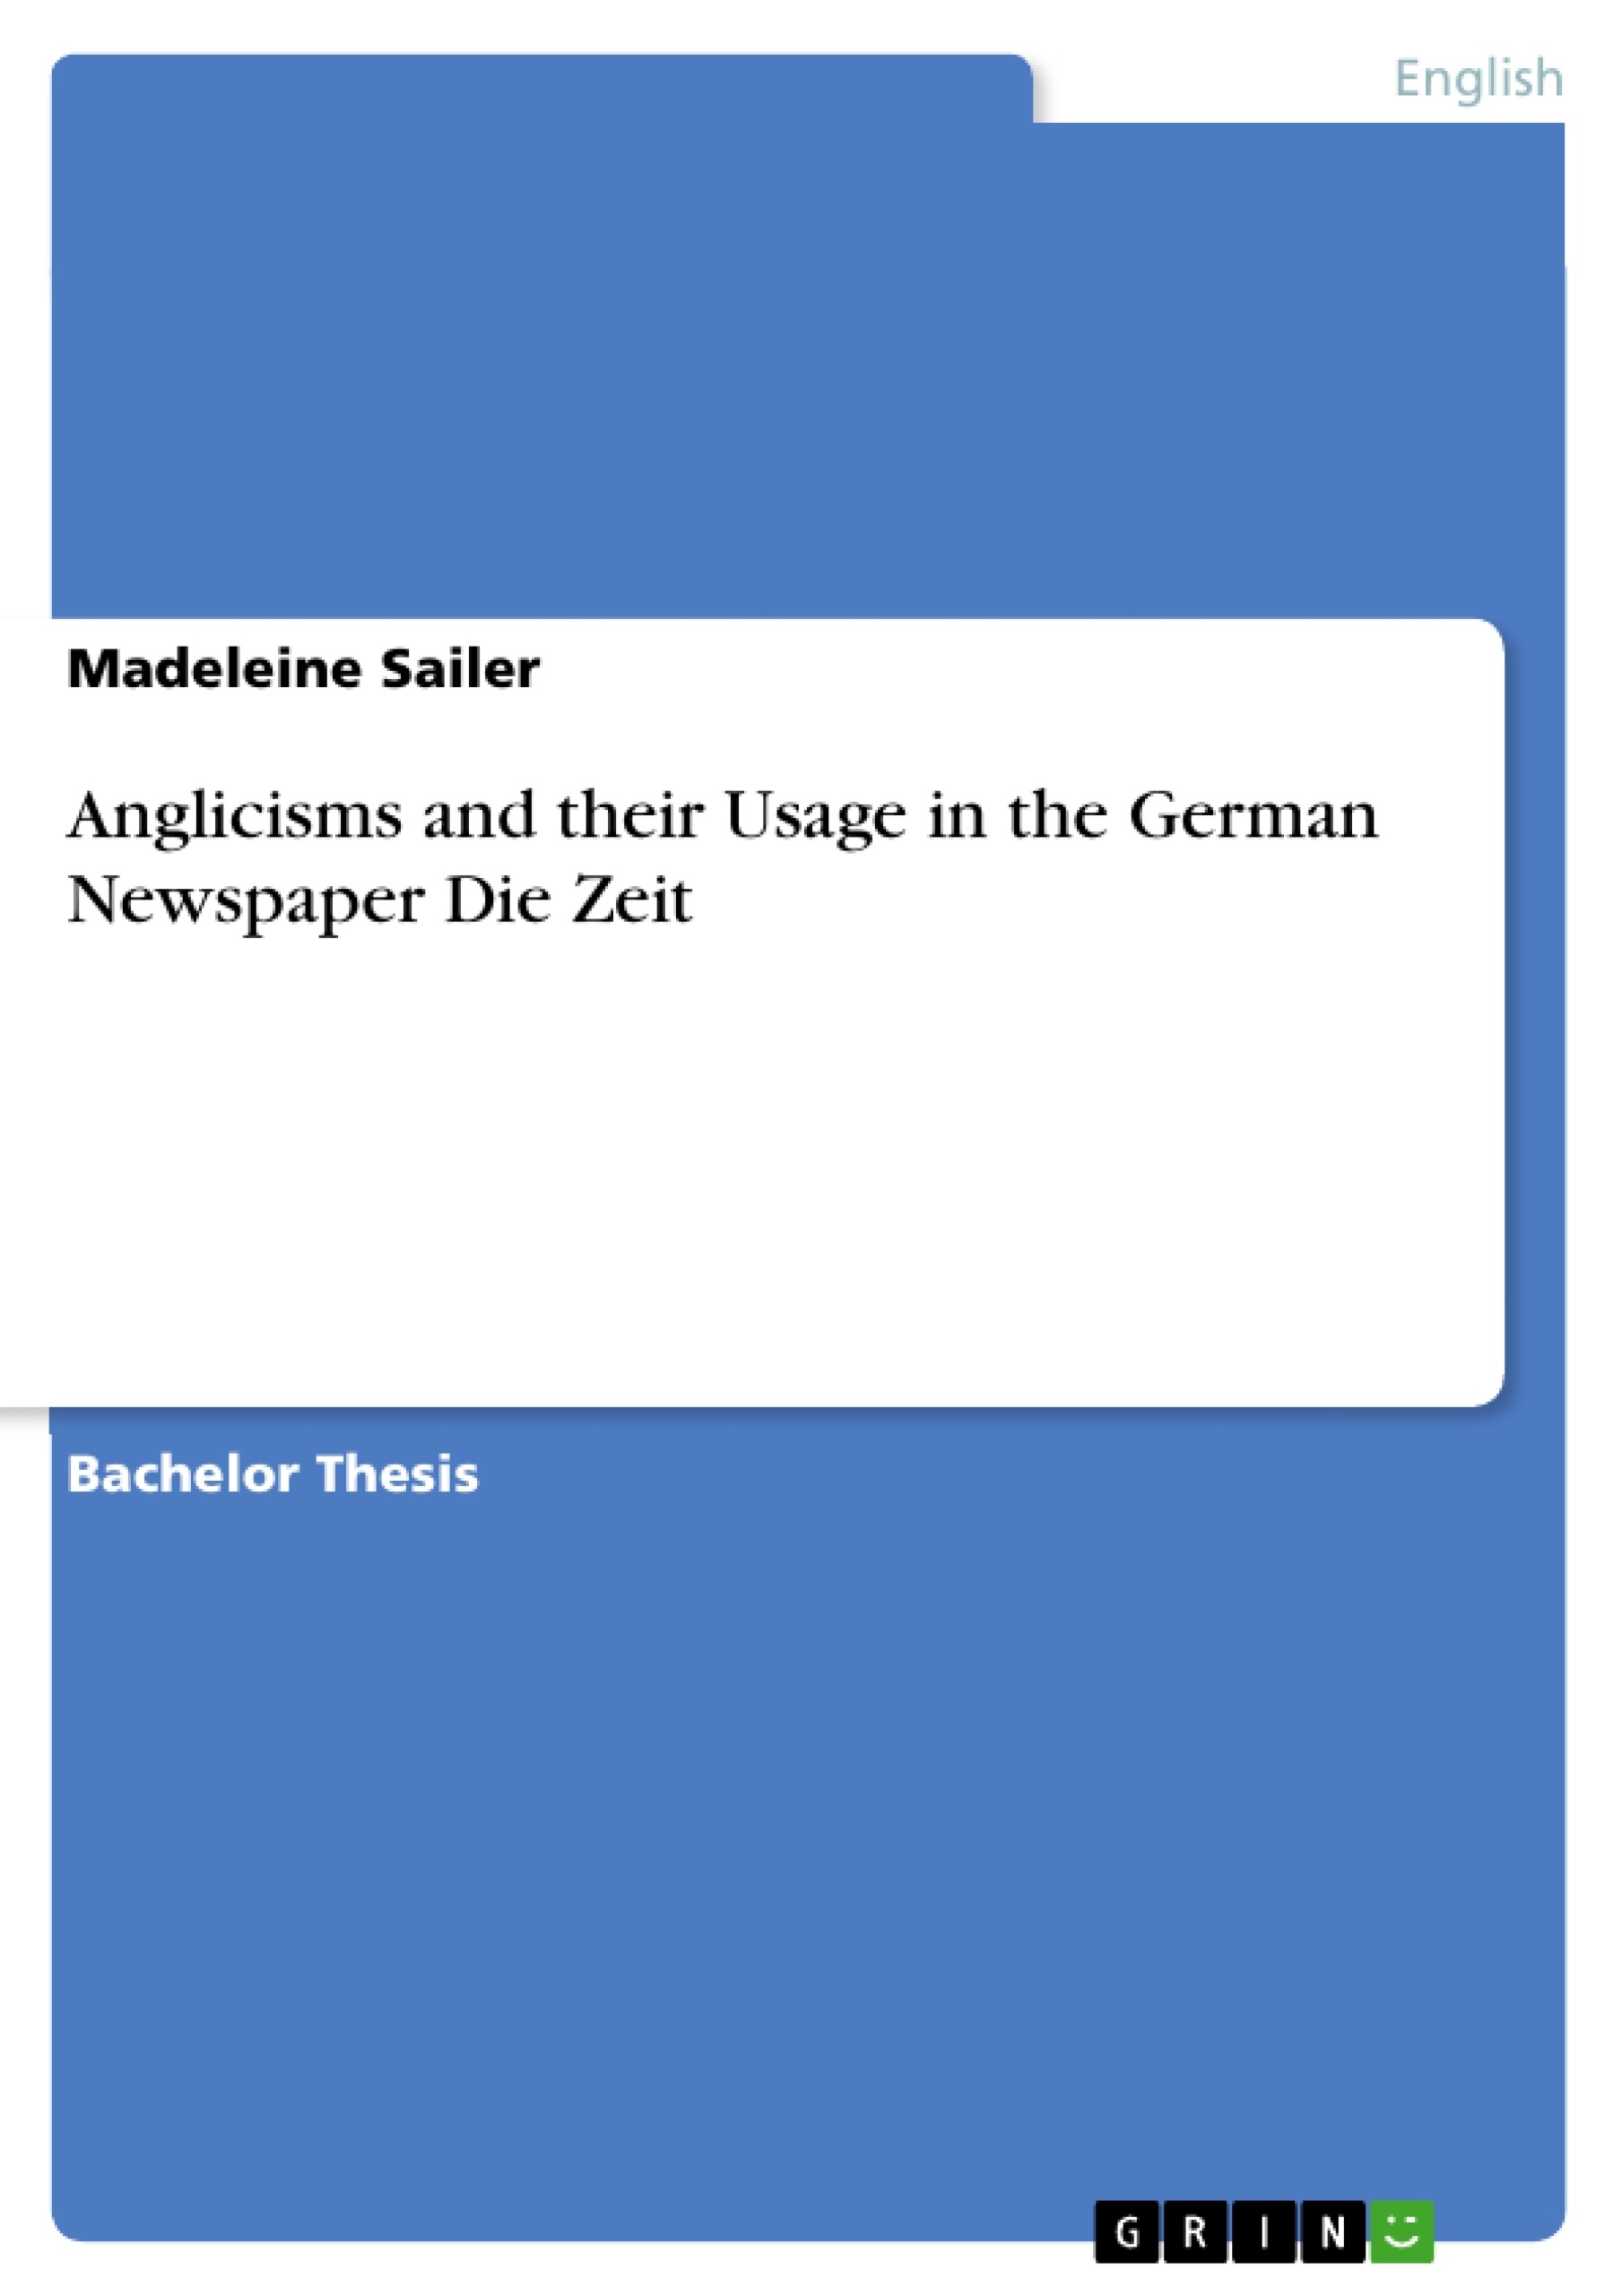 Título: Anglicisms and their Usage in the German Newspaper Die Zeit